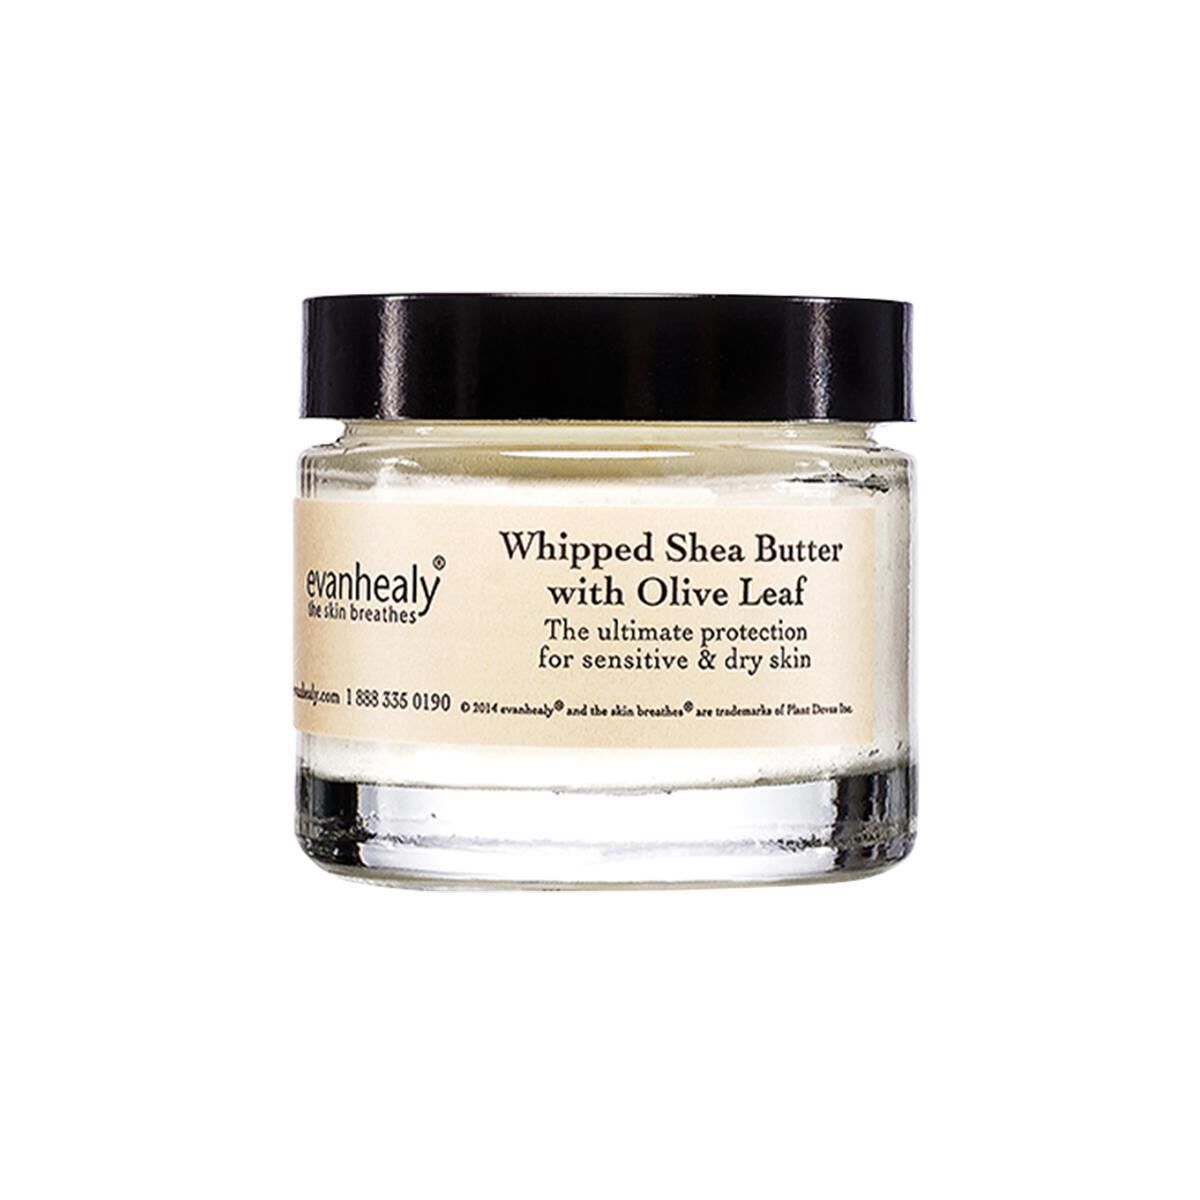 evanhealy - Whipped Shea Butter with Olive Leaf